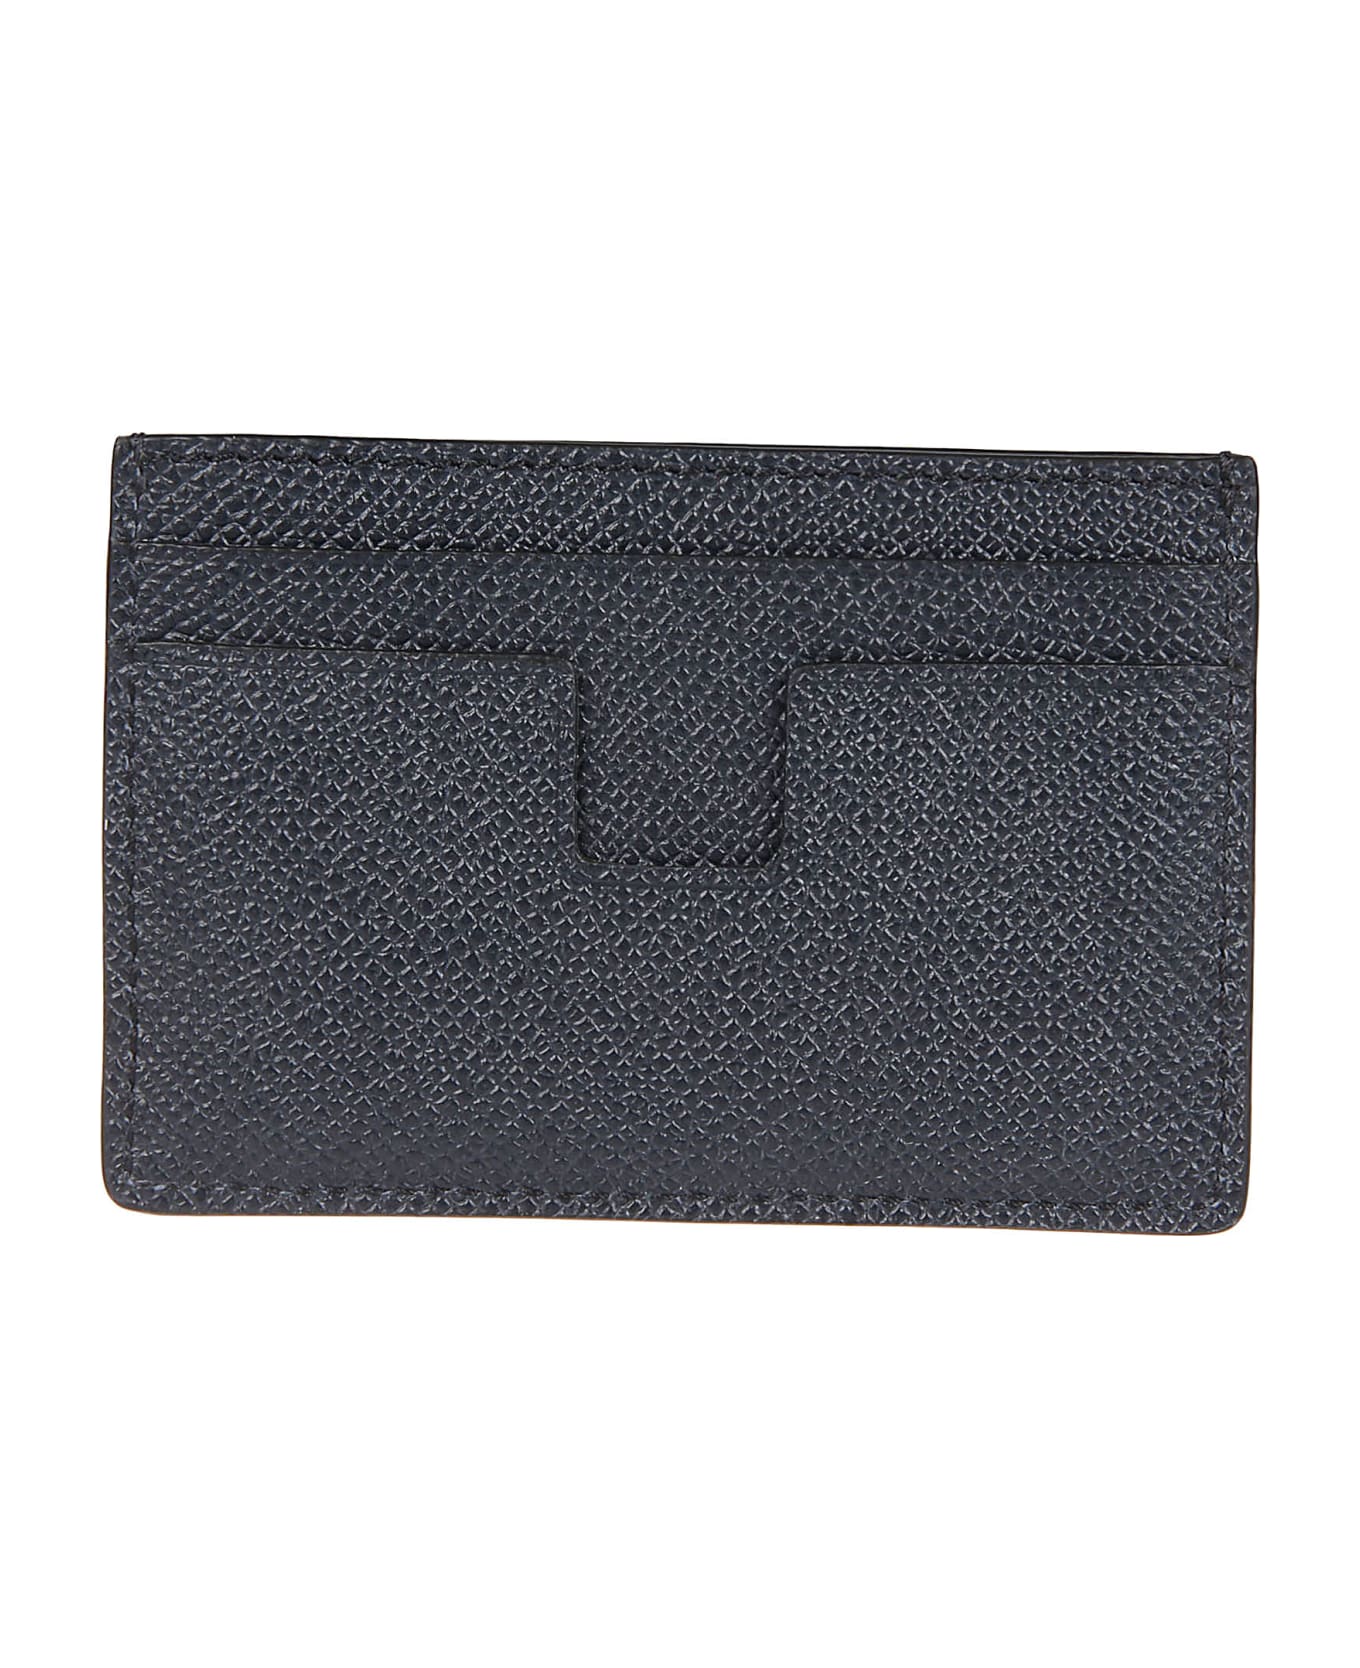 Tom Ford Logo Plaque Classic Credit Card Holder - Midnight Blue